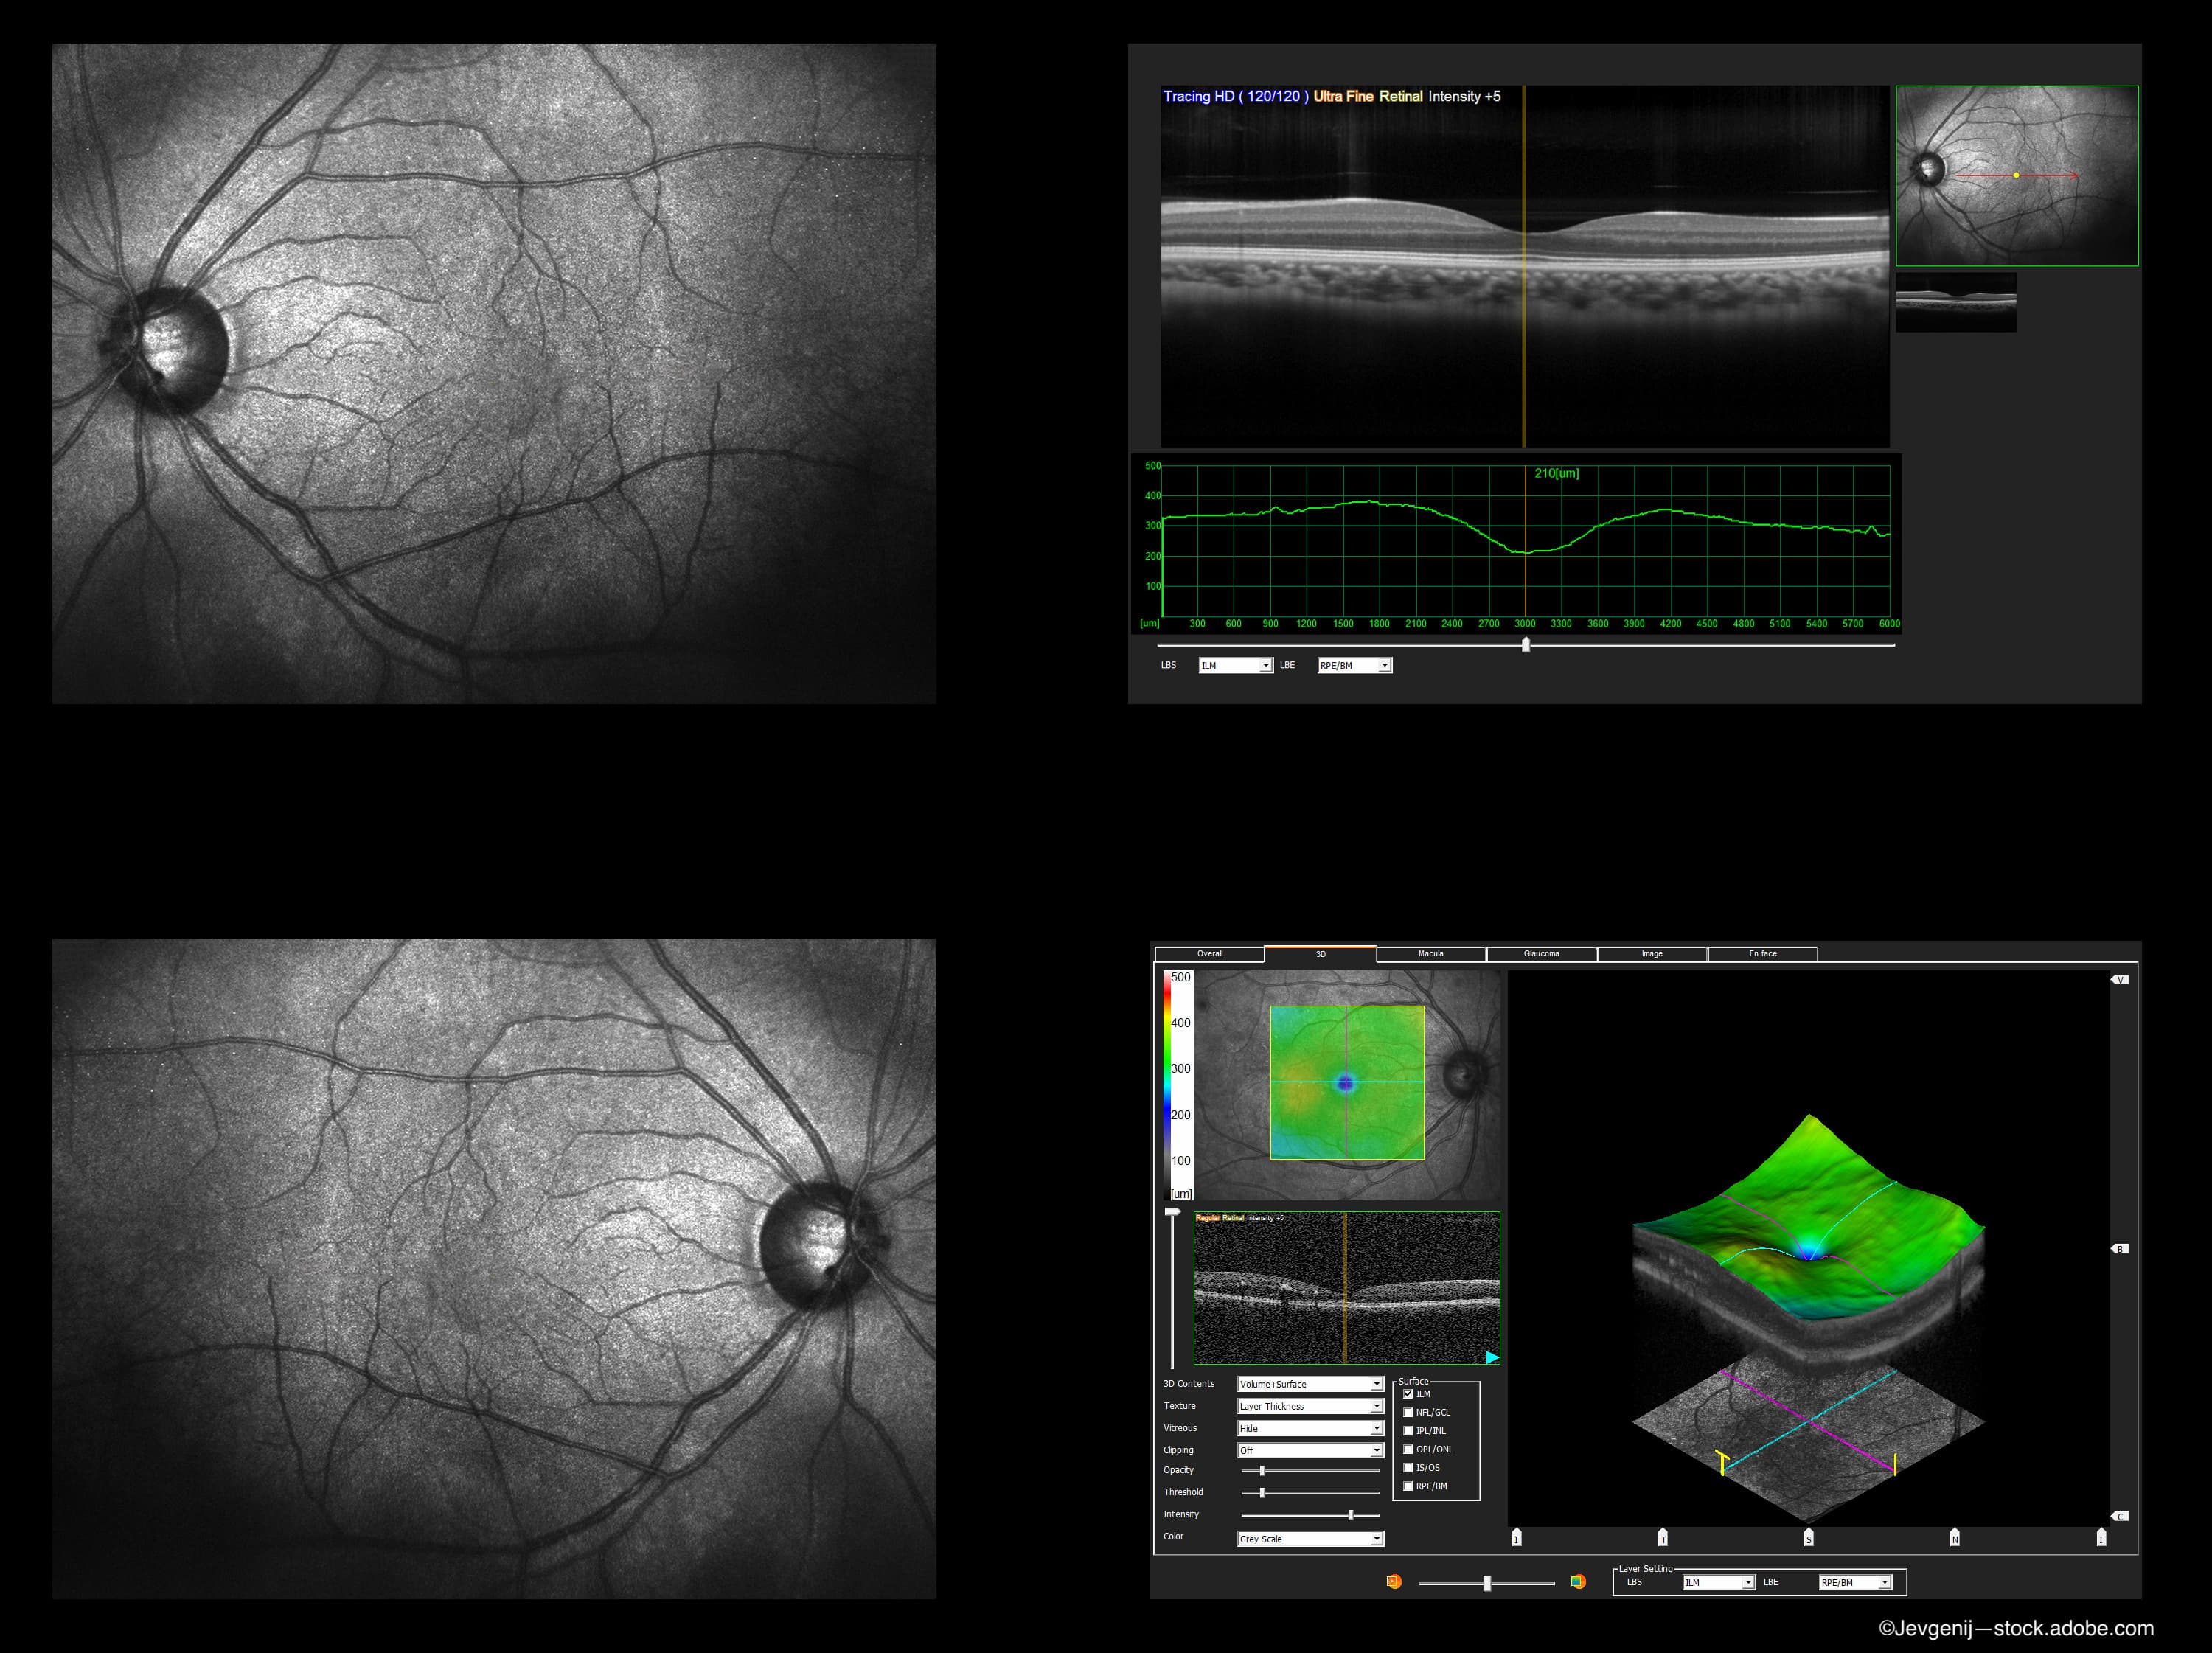 TOWER study: A new index to measure retinal fluid fluctuations in the retina in wet AMD